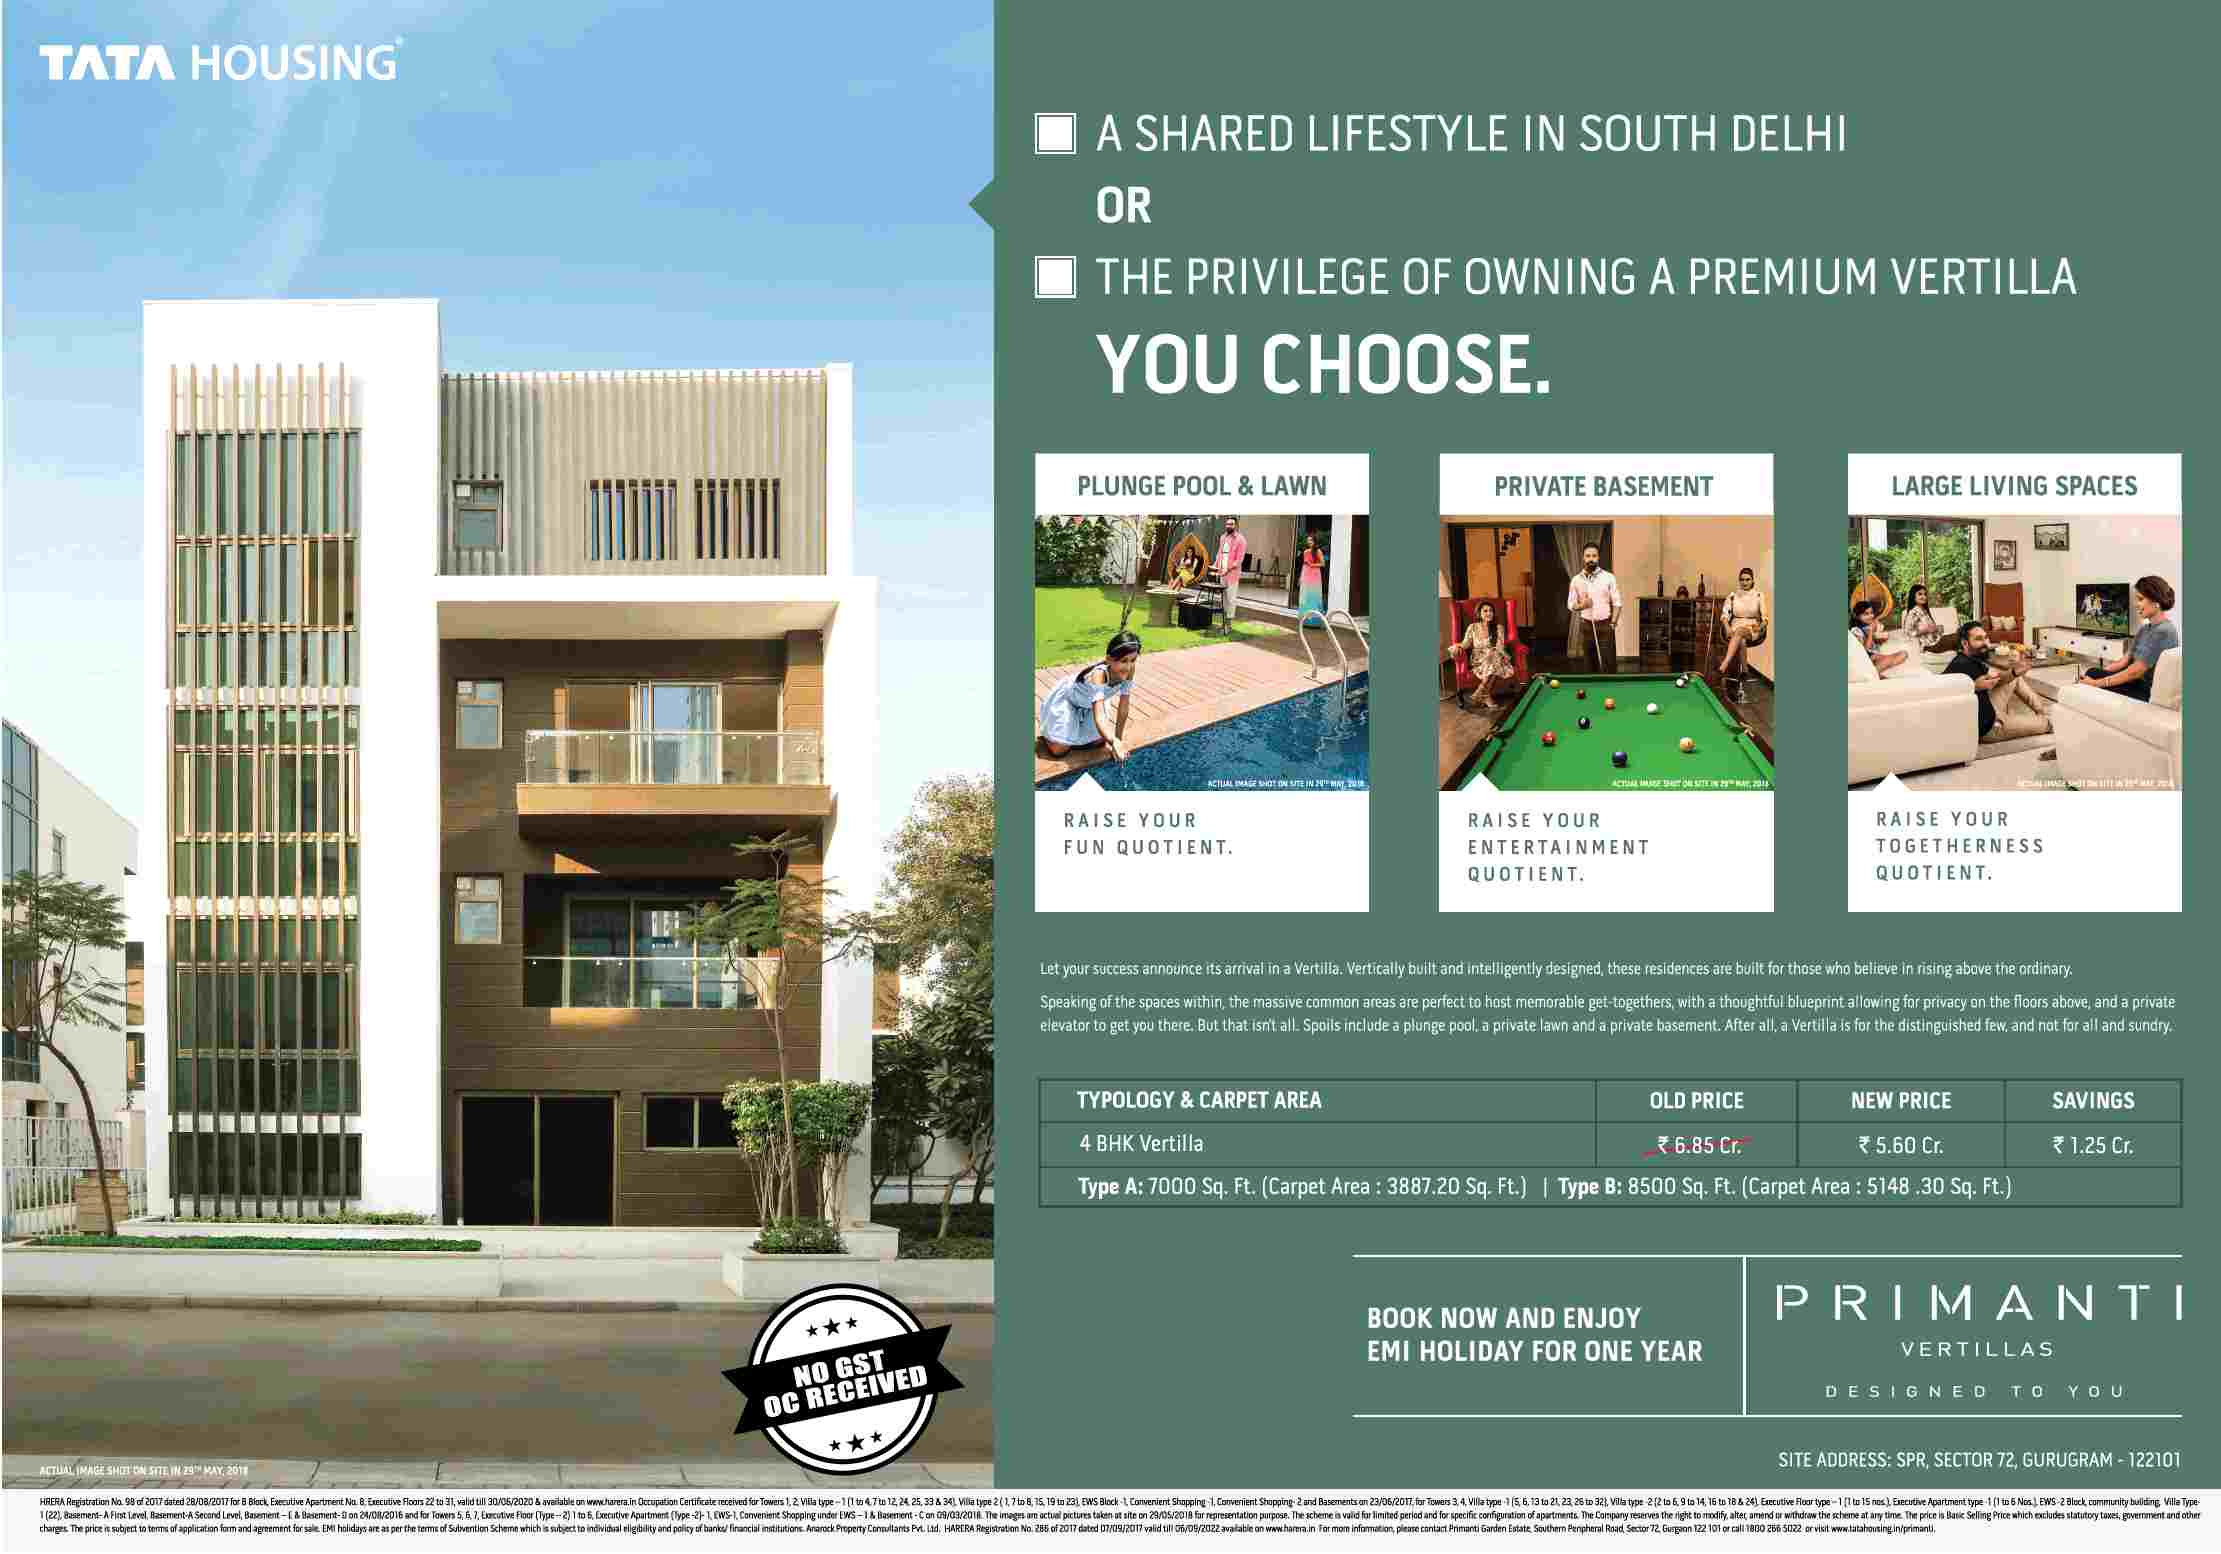 Book now and enjoy EMI holiday for one year at Tata Primanti in Gurgaon Update